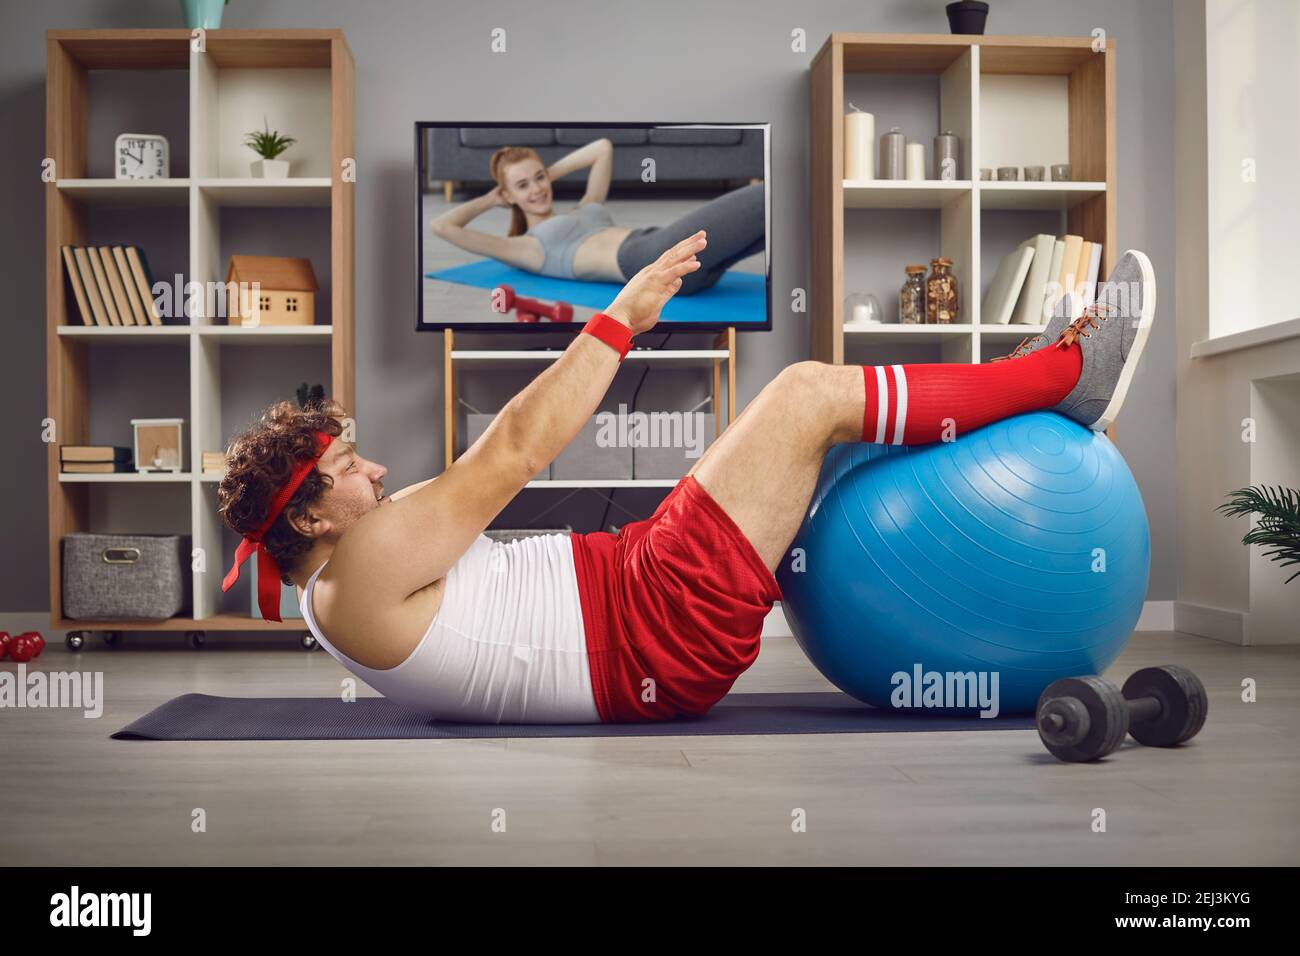 Funny fat man watching TV sports lesson and doing physical exercise with fitness ball Stock Photo